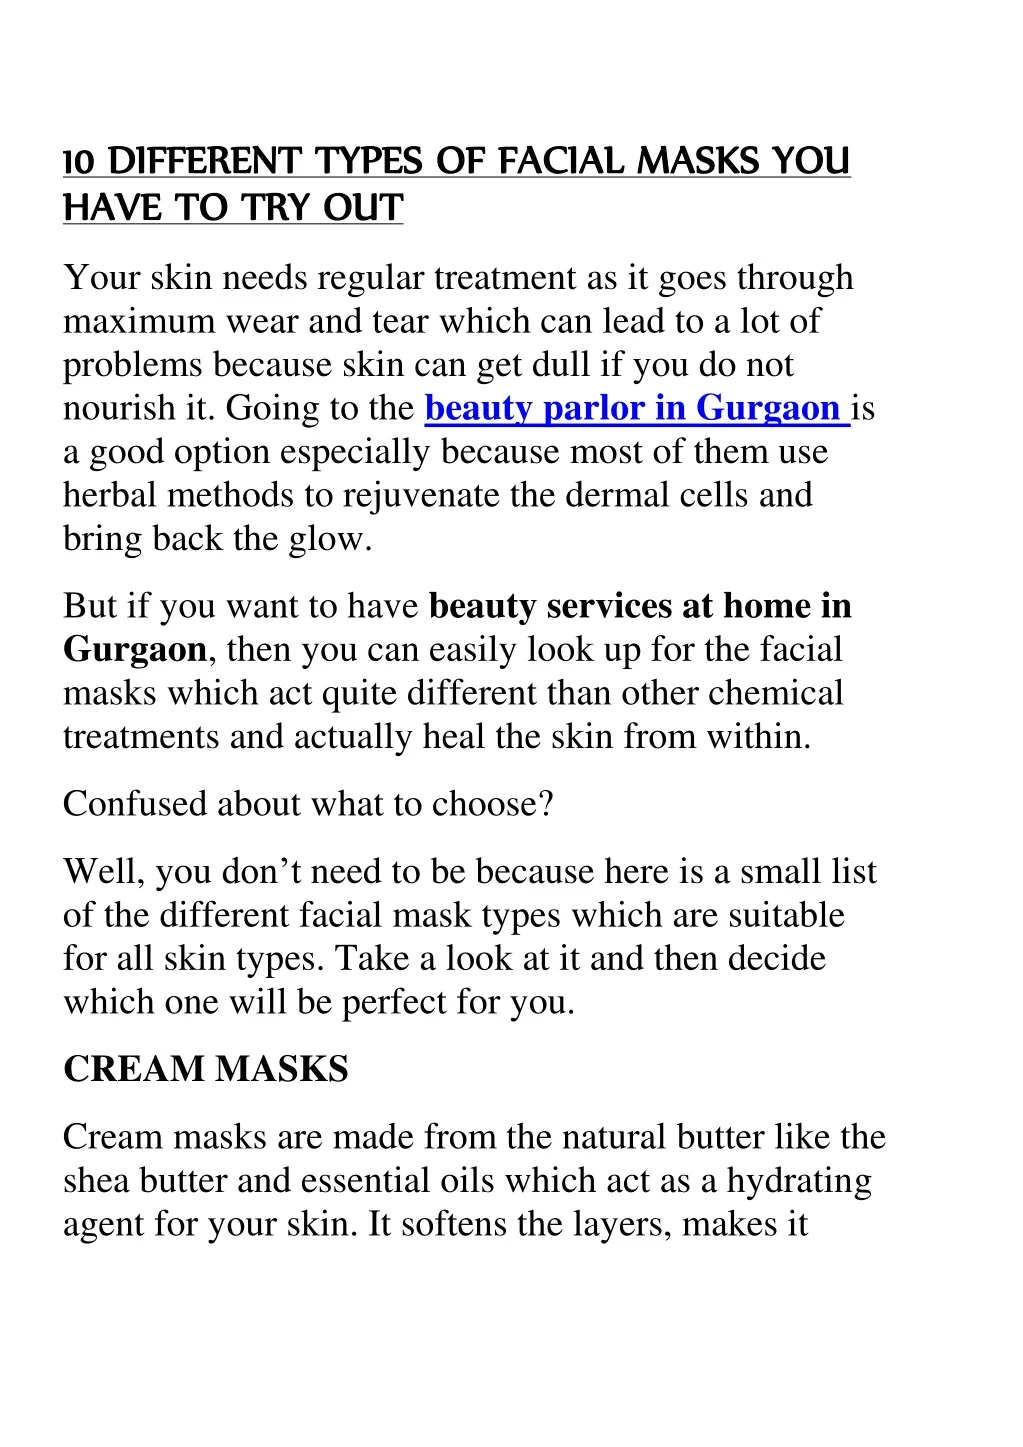 10 different types of facial masks